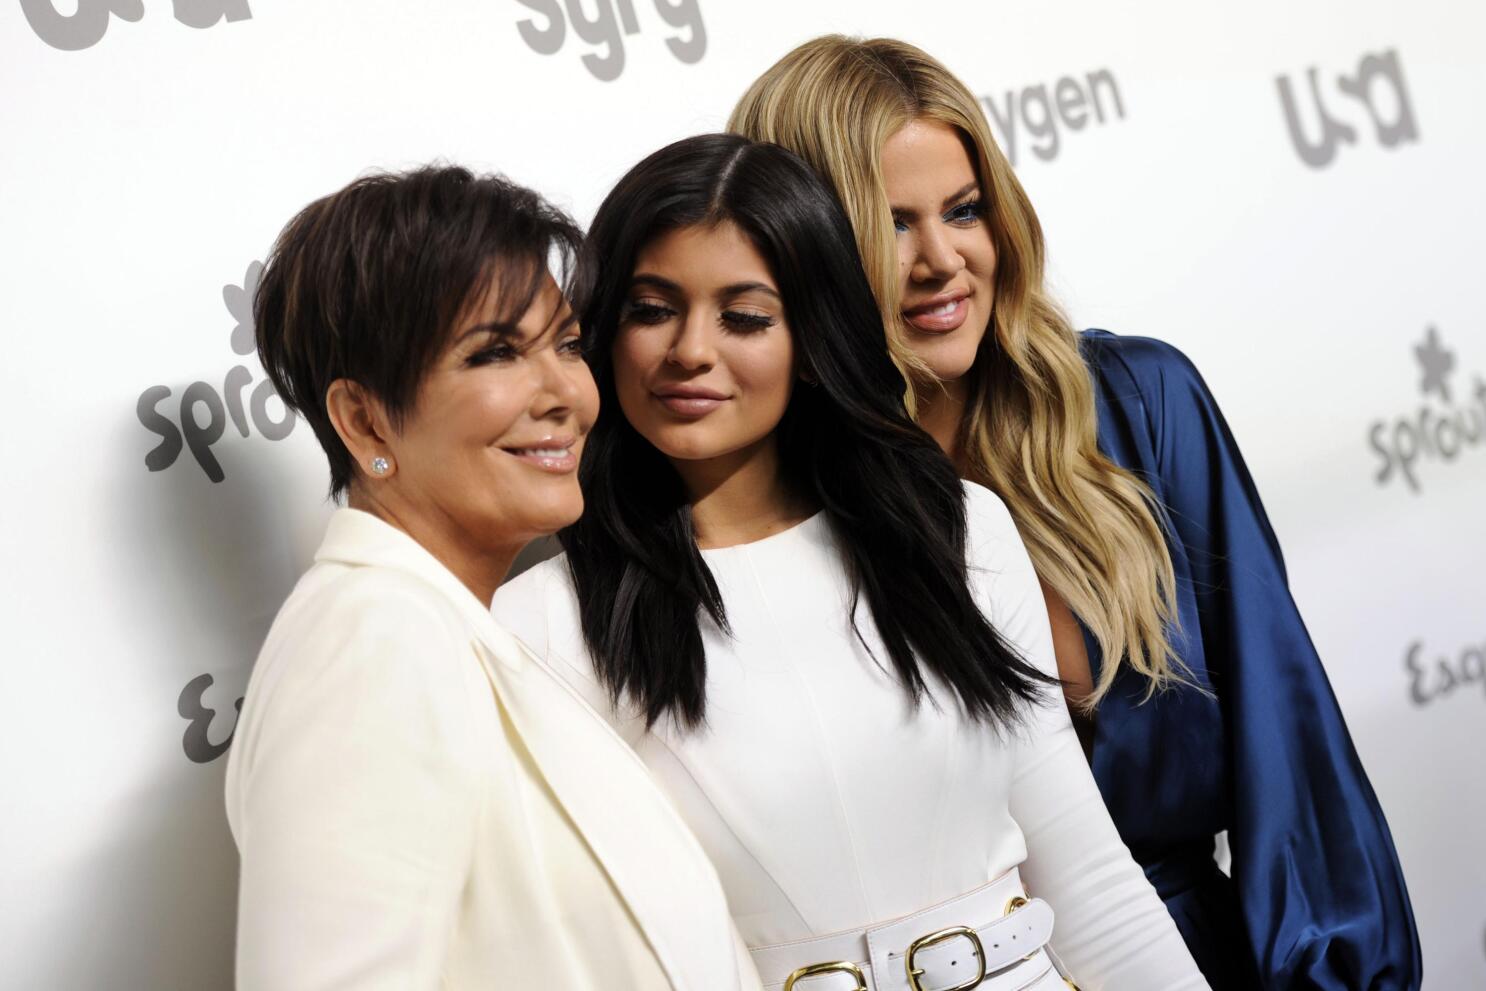 Kris Jenner testifies she had no ill feeling for Blac Chyna